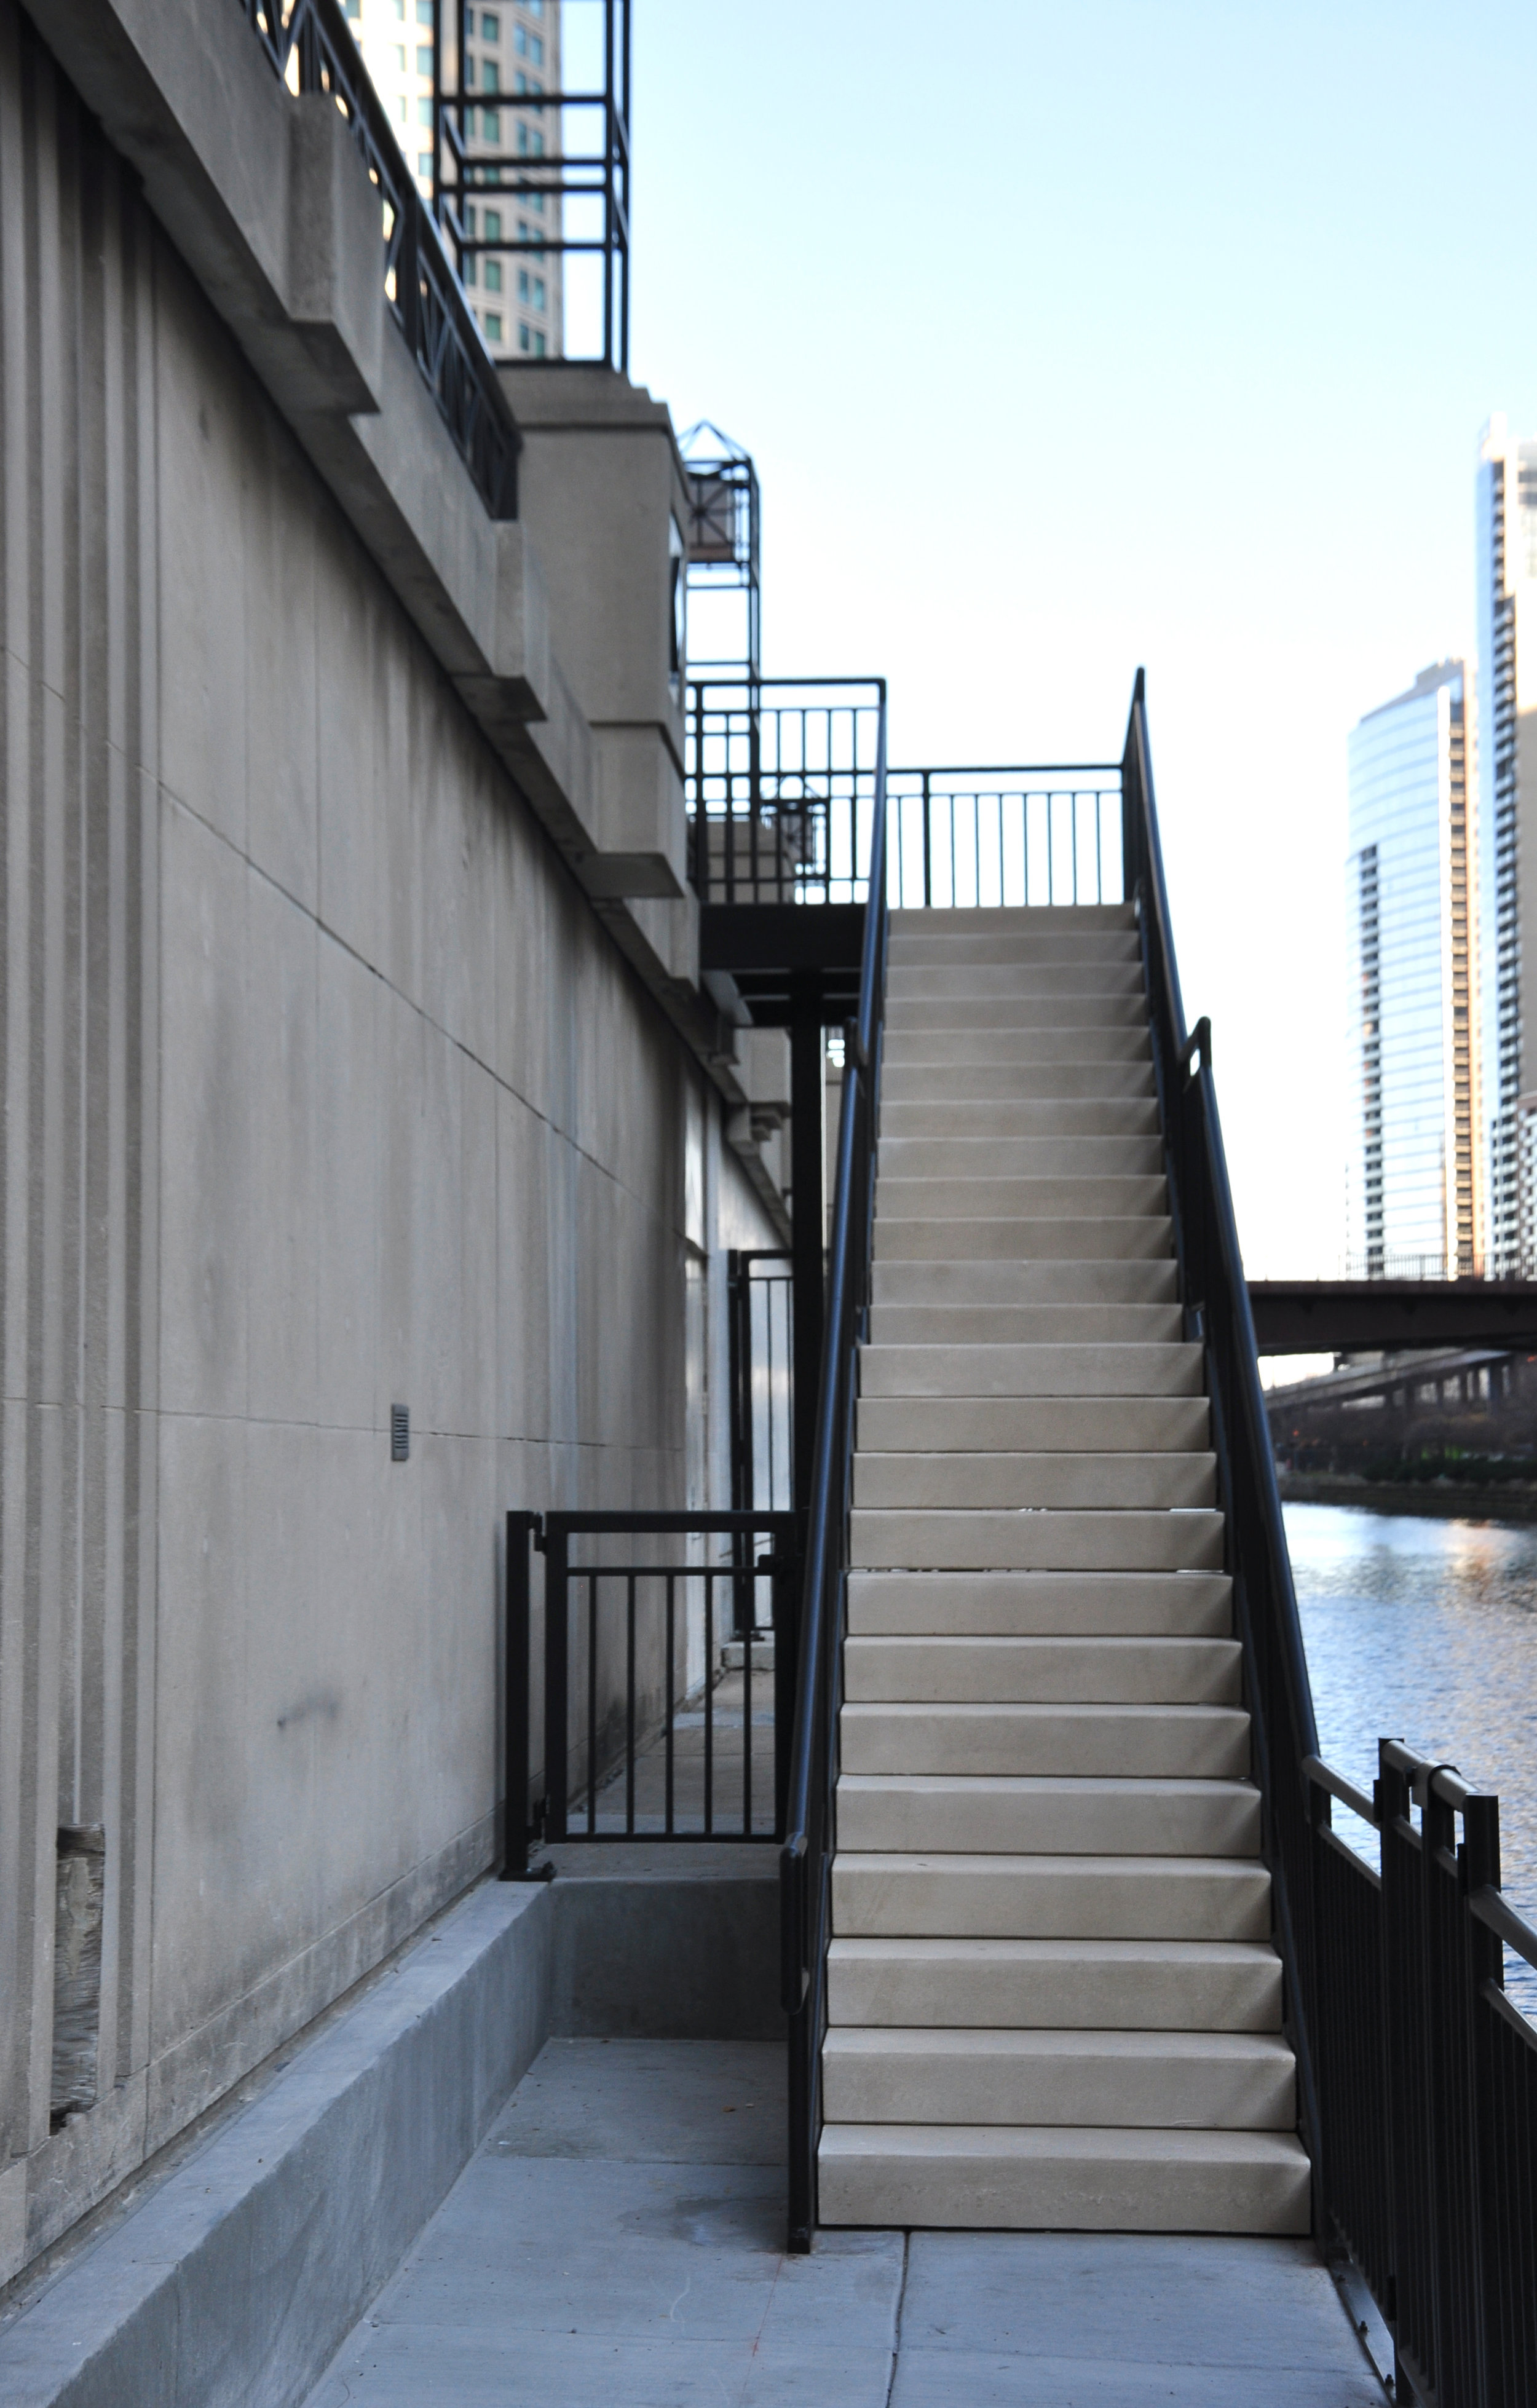 custom new construction, commercial design, staircase, stairway, new stairs, Chicago Riverwalk River, boat dock, improve access, waterfront, riverfront, waterways